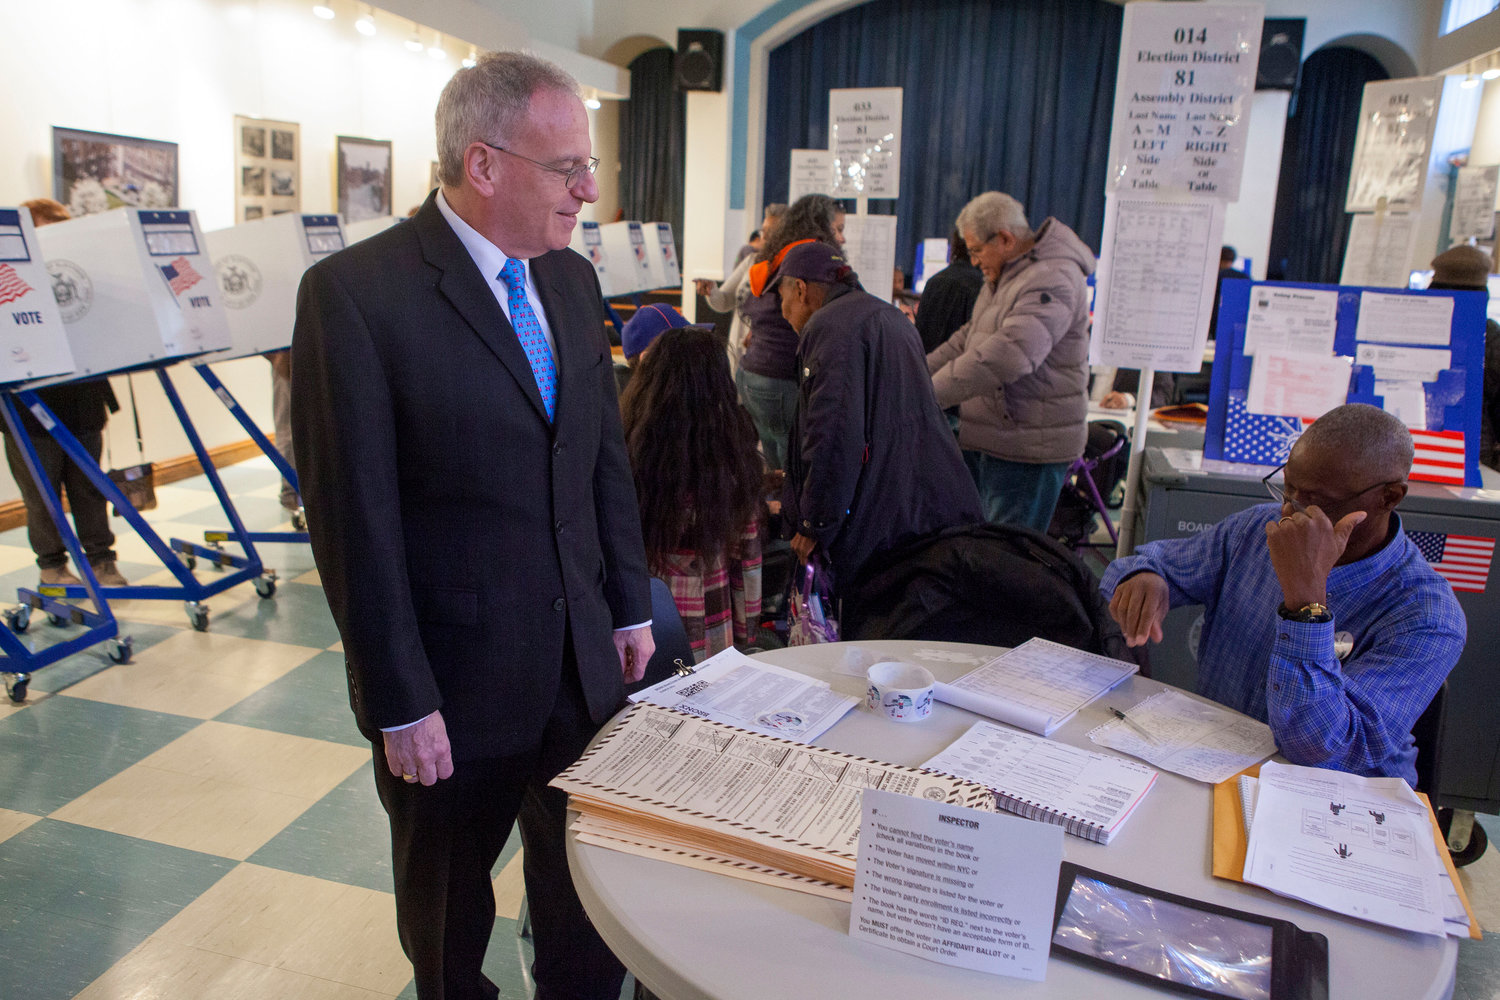 Thanks in part to legislation proposed by Assemblyman Jeff Dinowitz, all registered voters in New York can apply for an absentee ballot if they want to stay away from in-person poll sites due to the coronavirus pandemic. Voting by mail, early in-person, or on election day are all options this November.